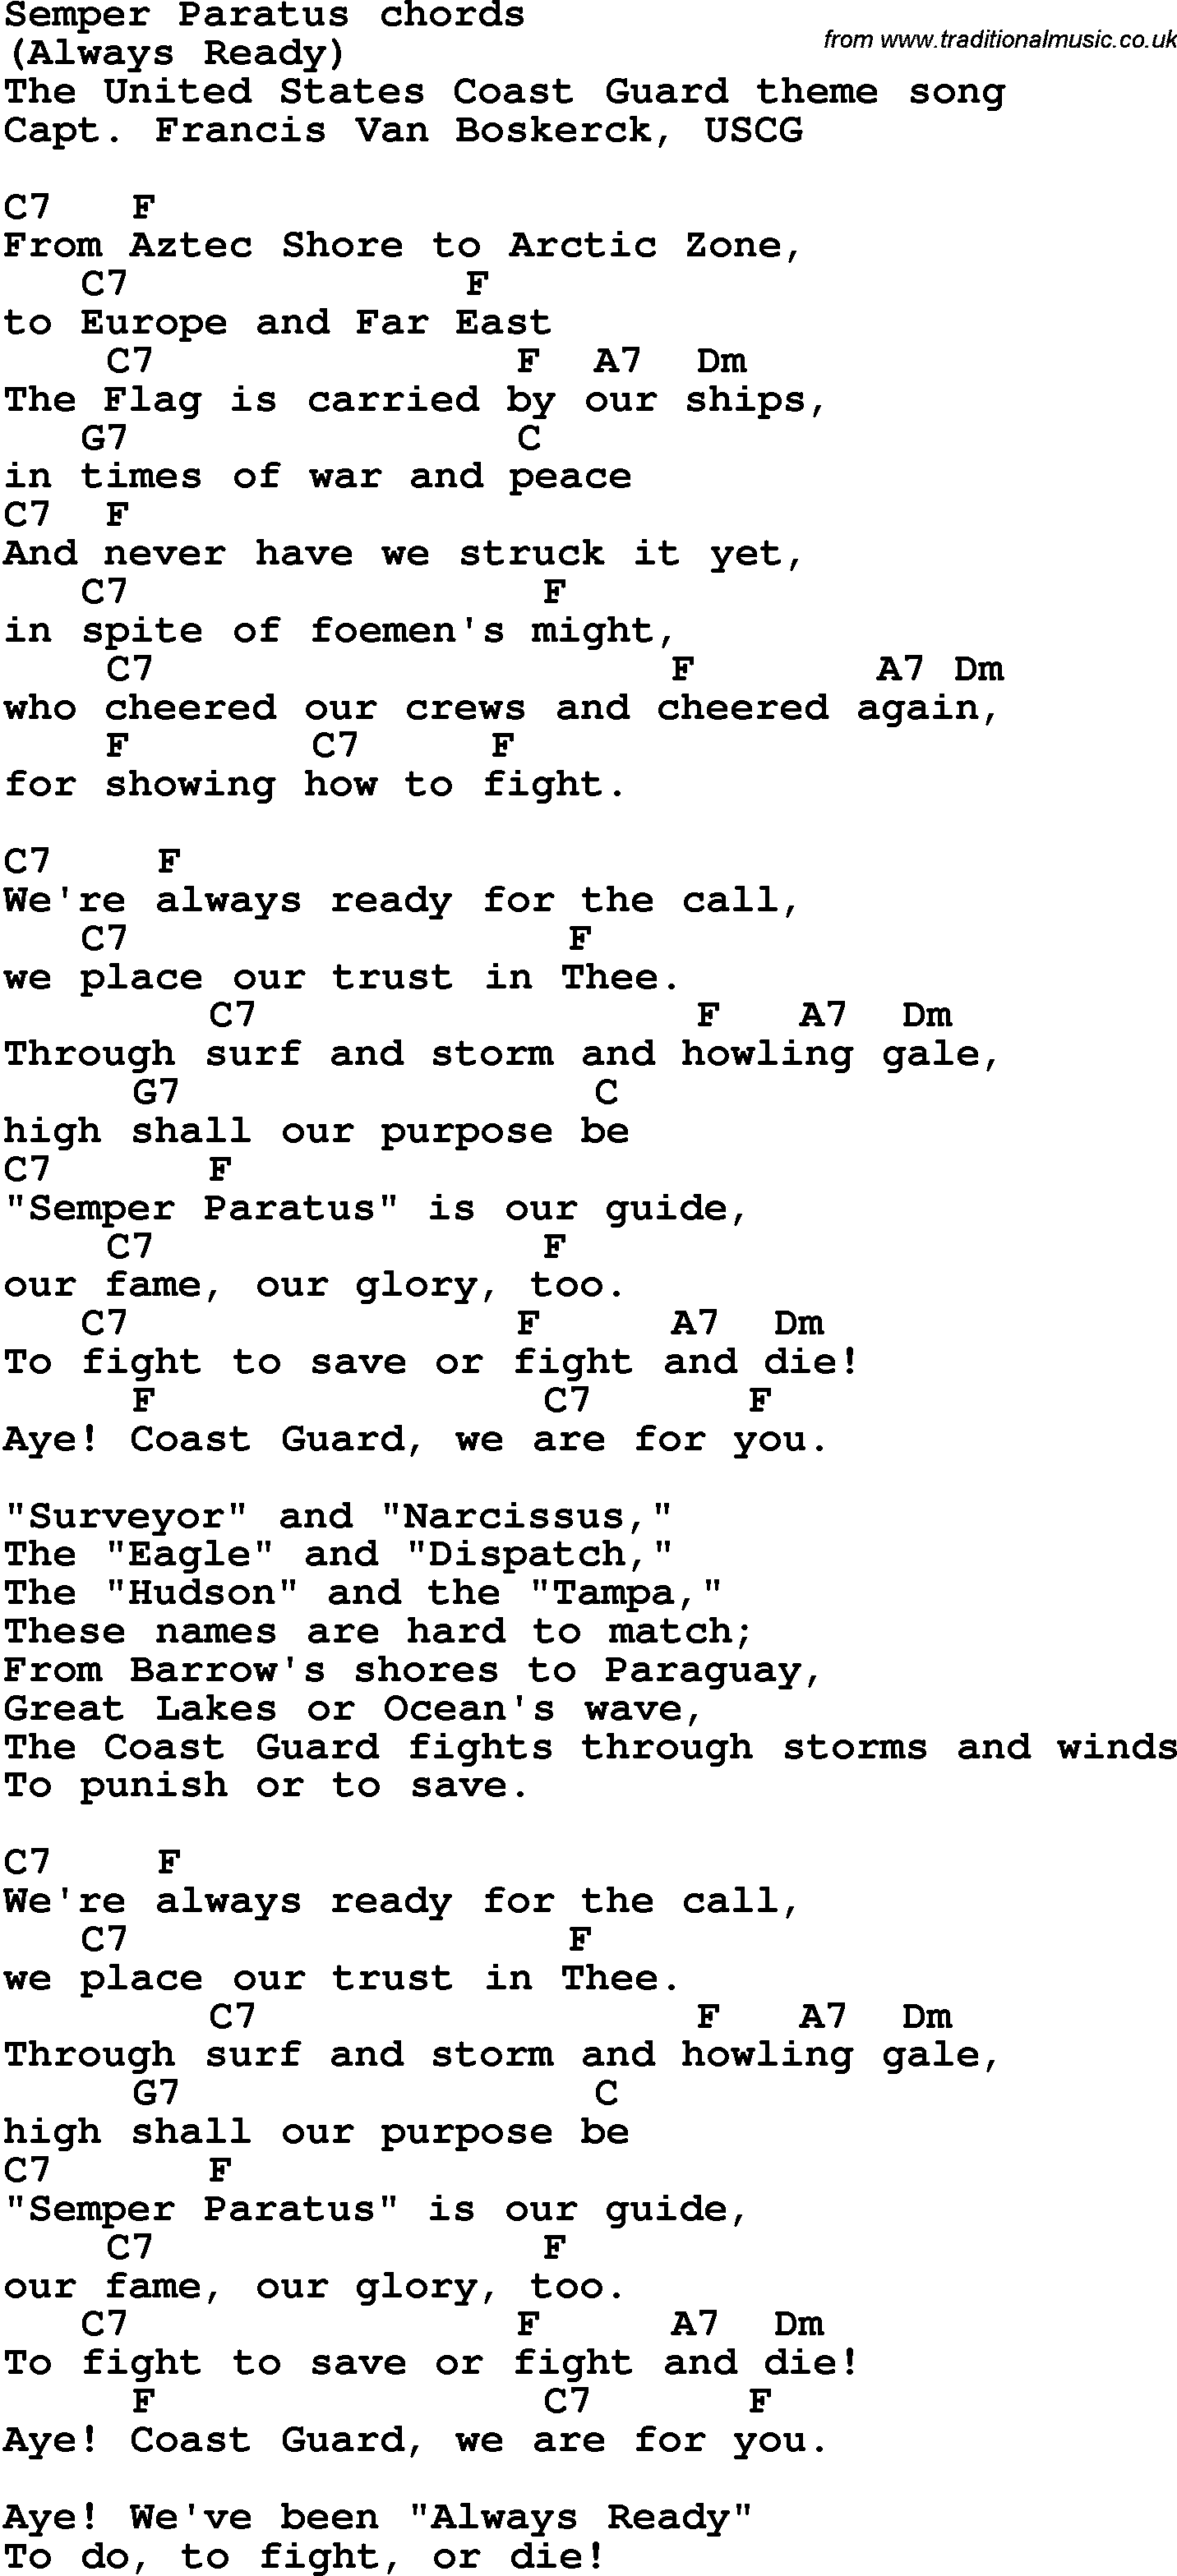 Song Lyrics with guitar chords for Semper Paratus